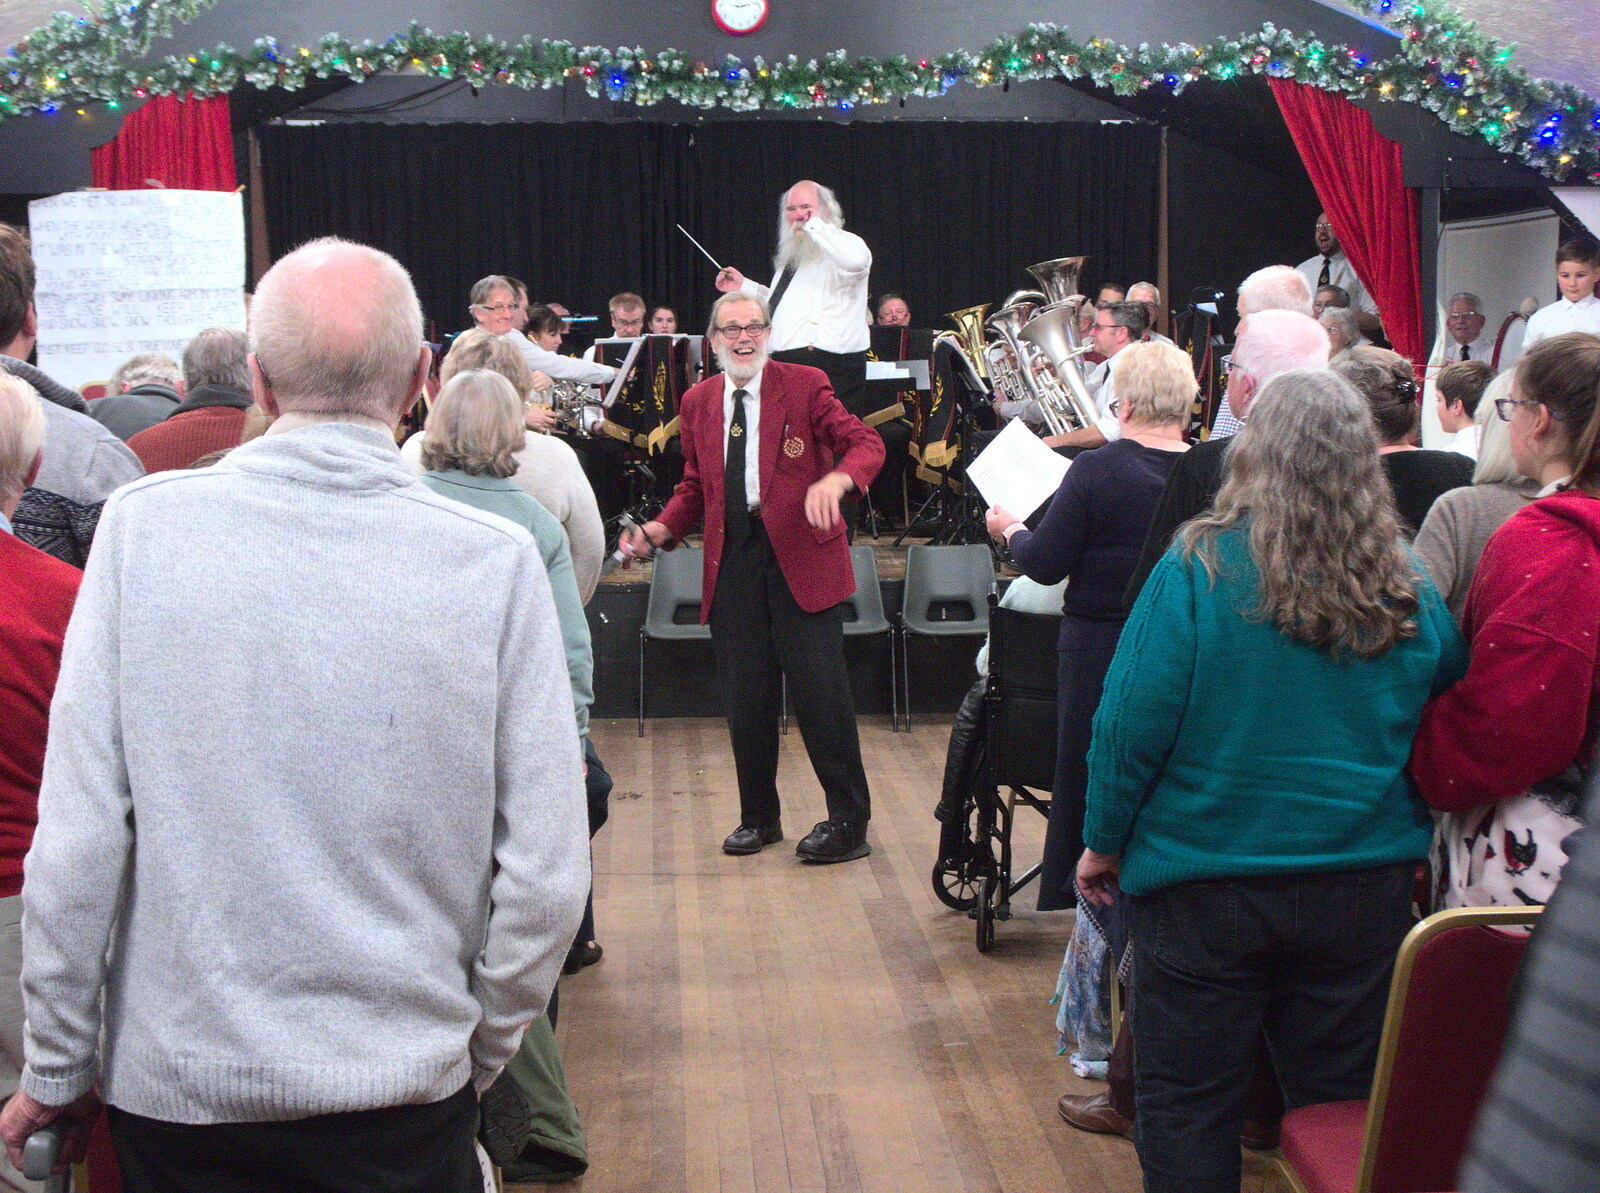 There's some crowd participation for a waltz from The Gislingham Silver Band Christmas Concert, Gislingham, Suffolk - 11th December 2018